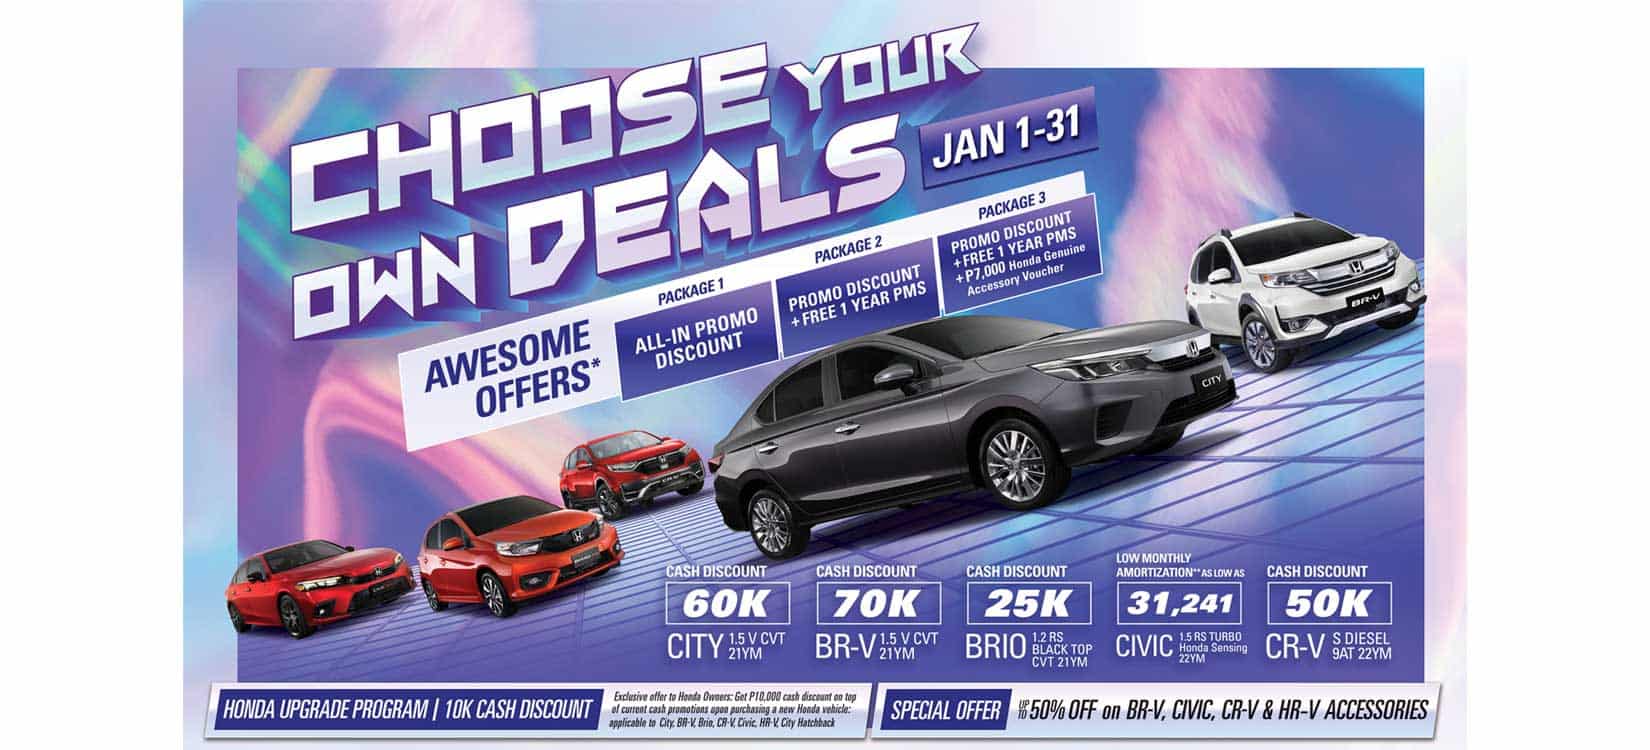 New Year, New Wheels with Honda’s “Choose Your Own Deals”